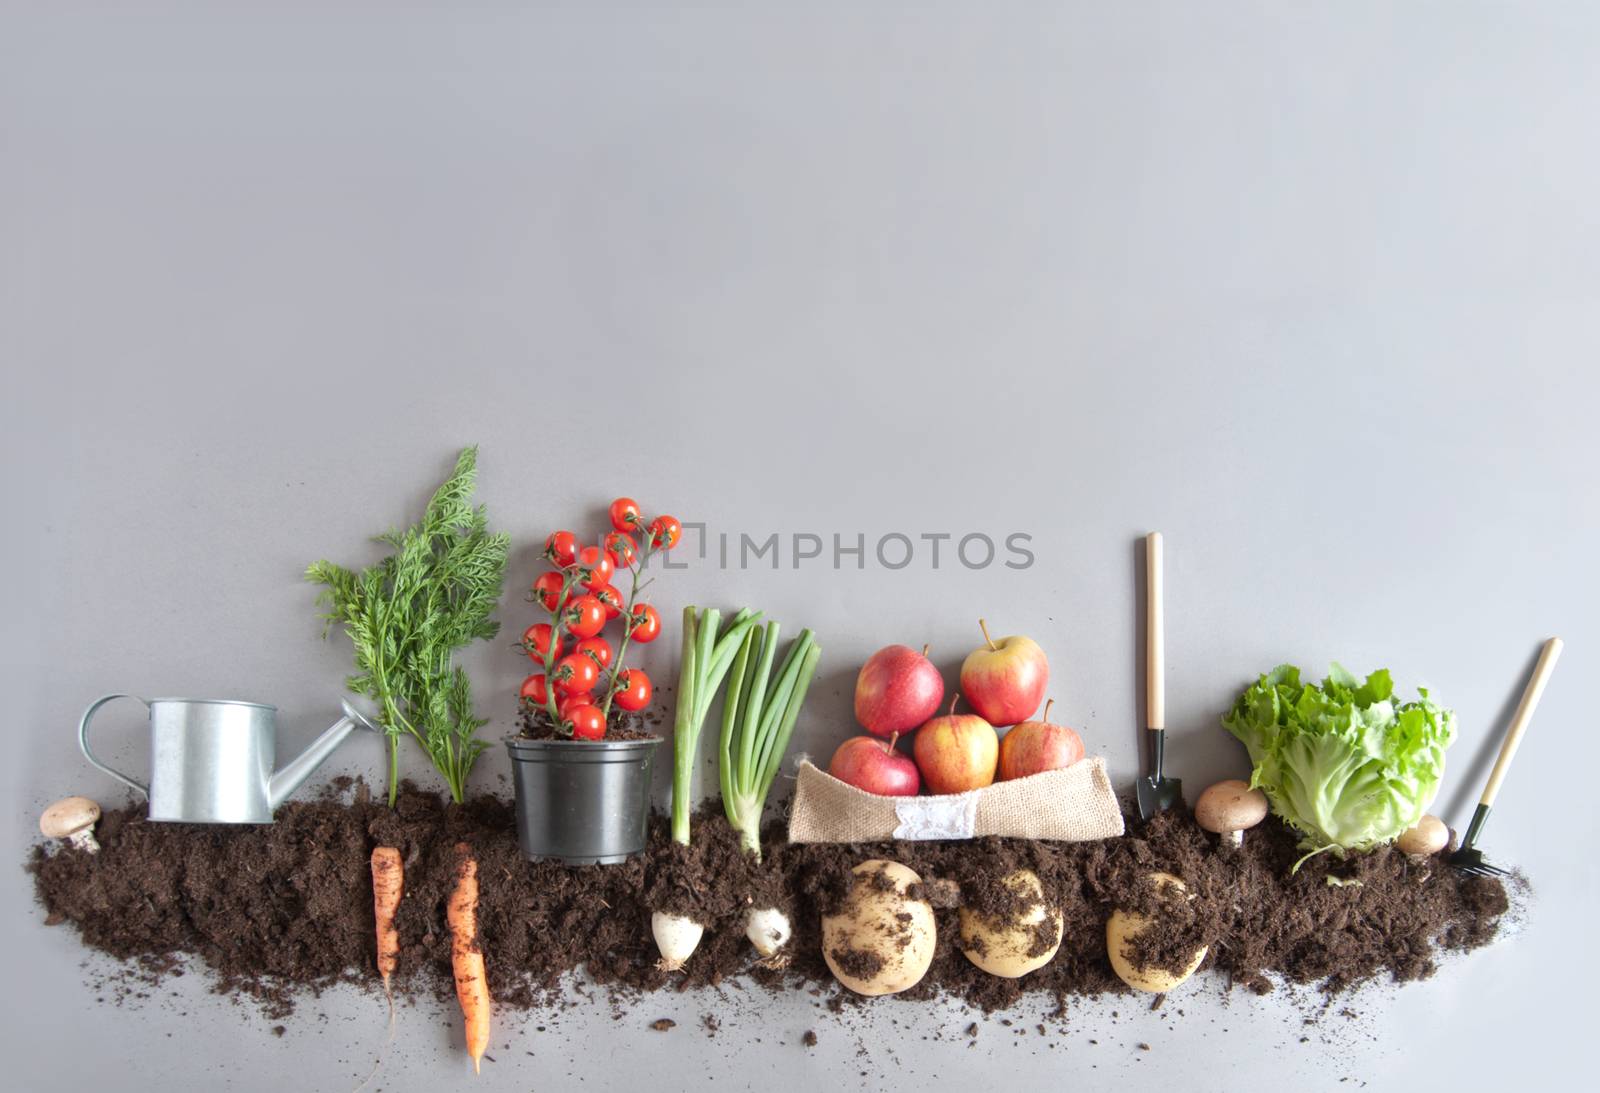 Organic fruit and vegtable garden background by unikpix